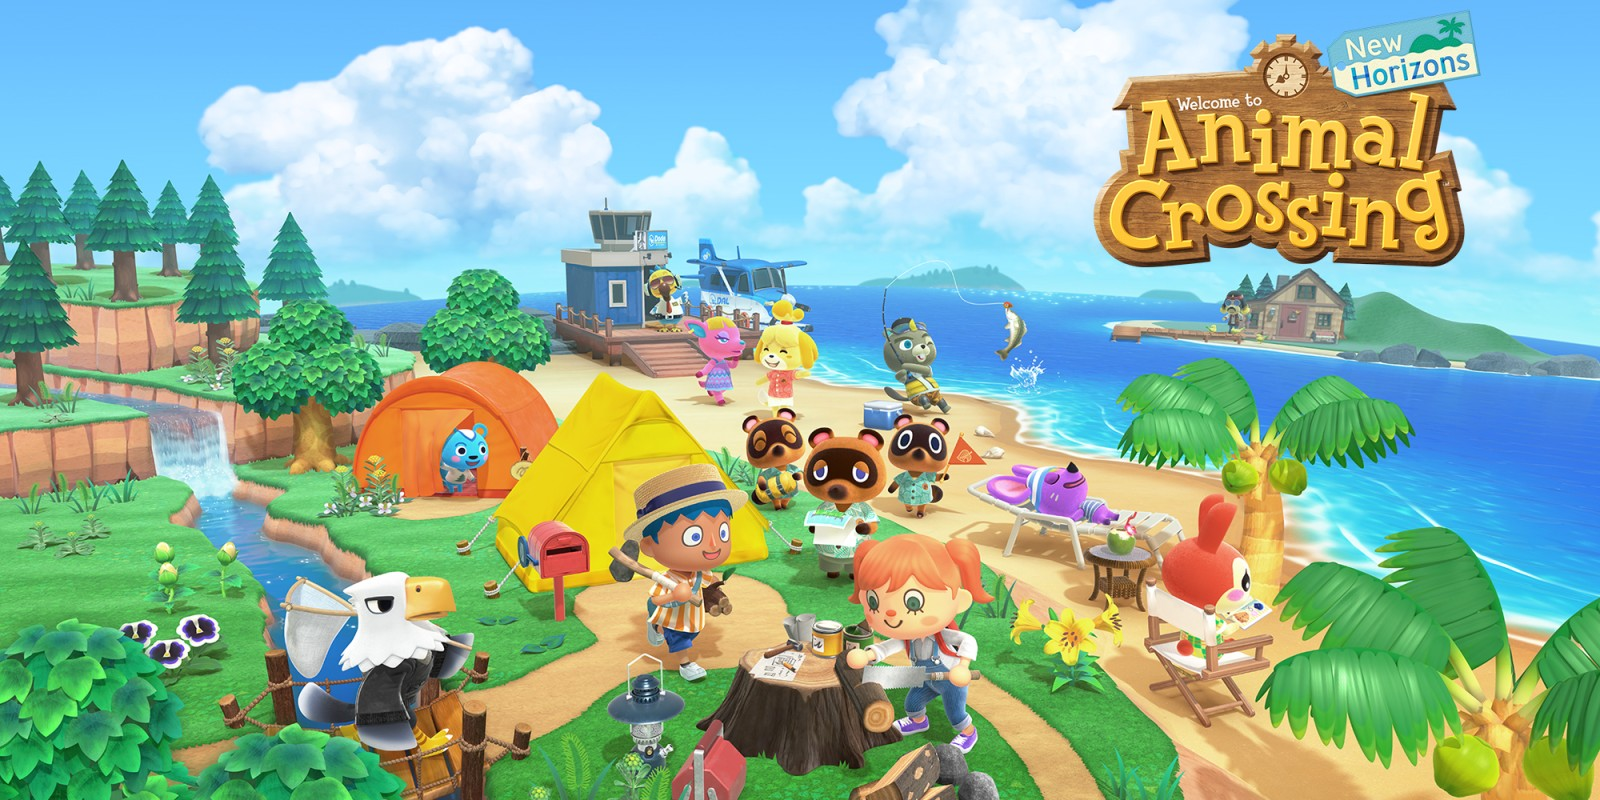 Animal Crossing: Can Luxury Leverage the Hype?